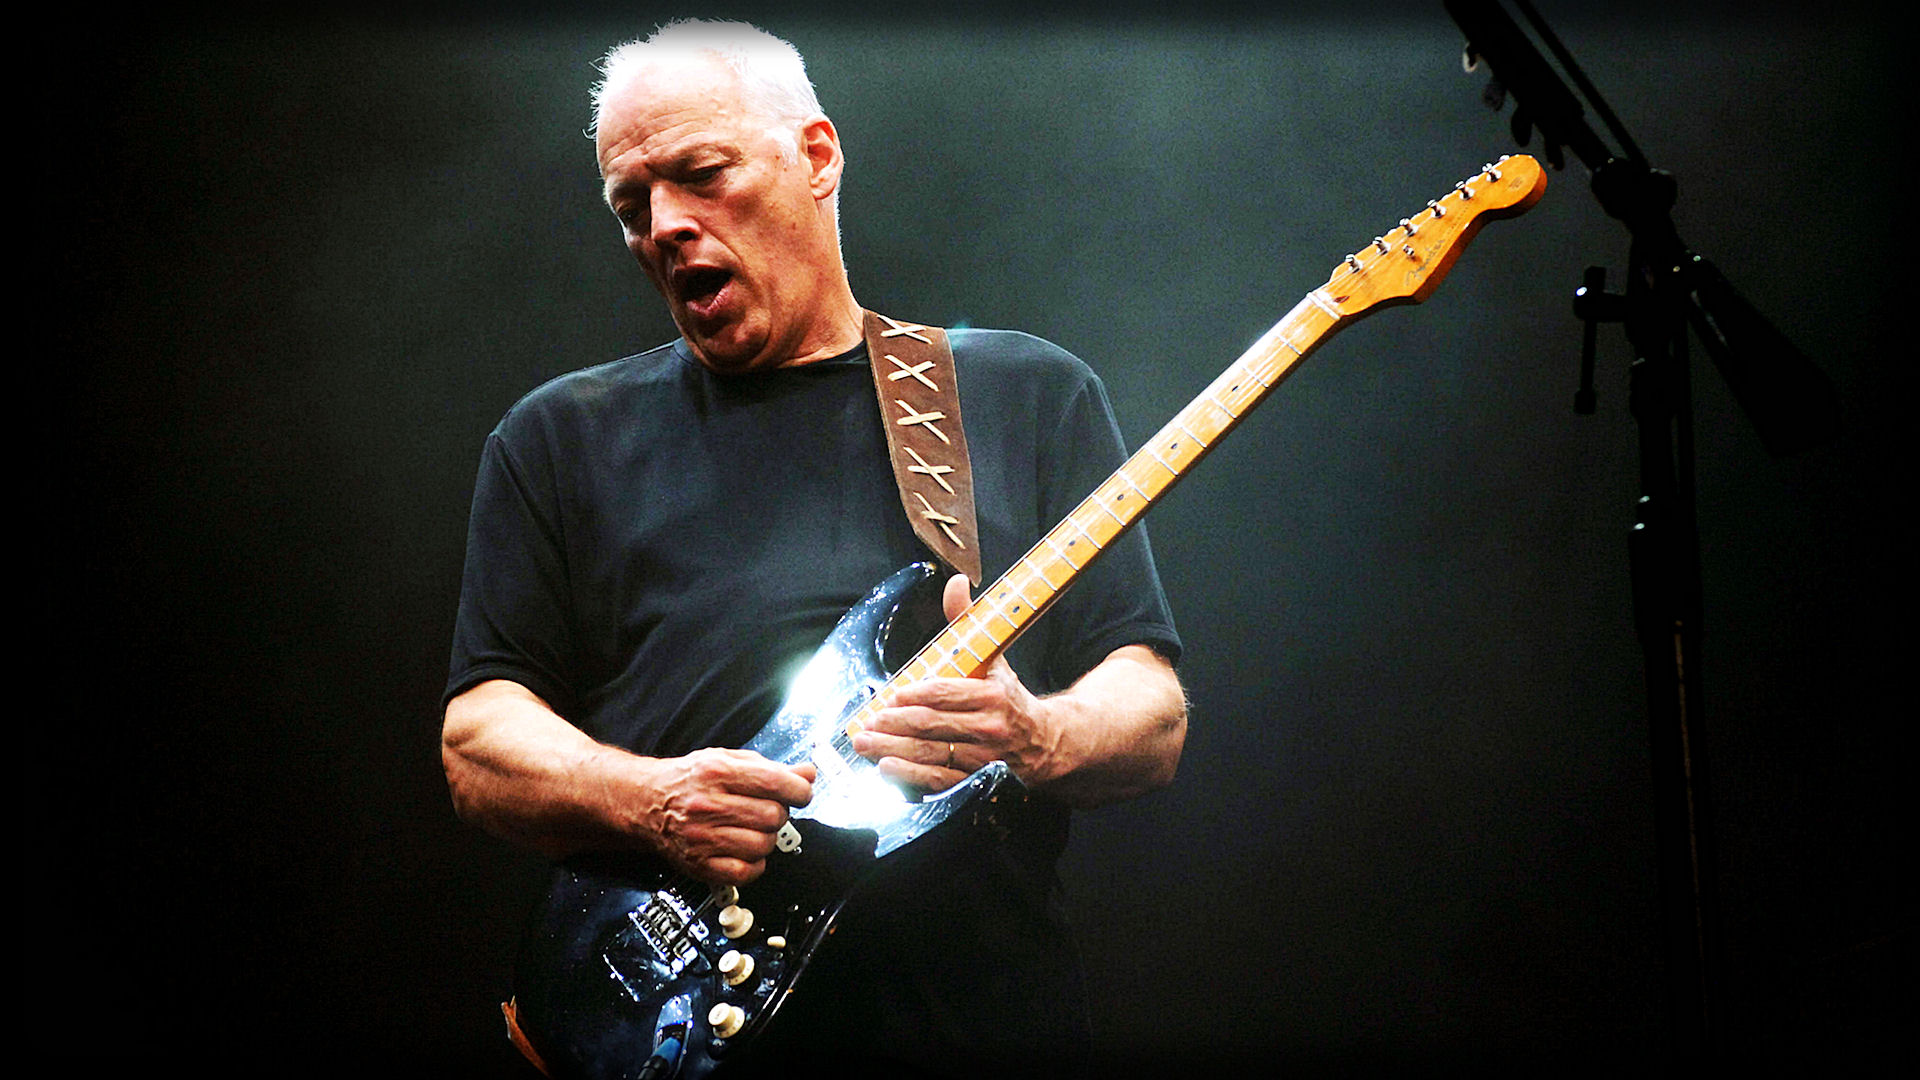 David Gilmour With Guitar - HD Wallpaper 